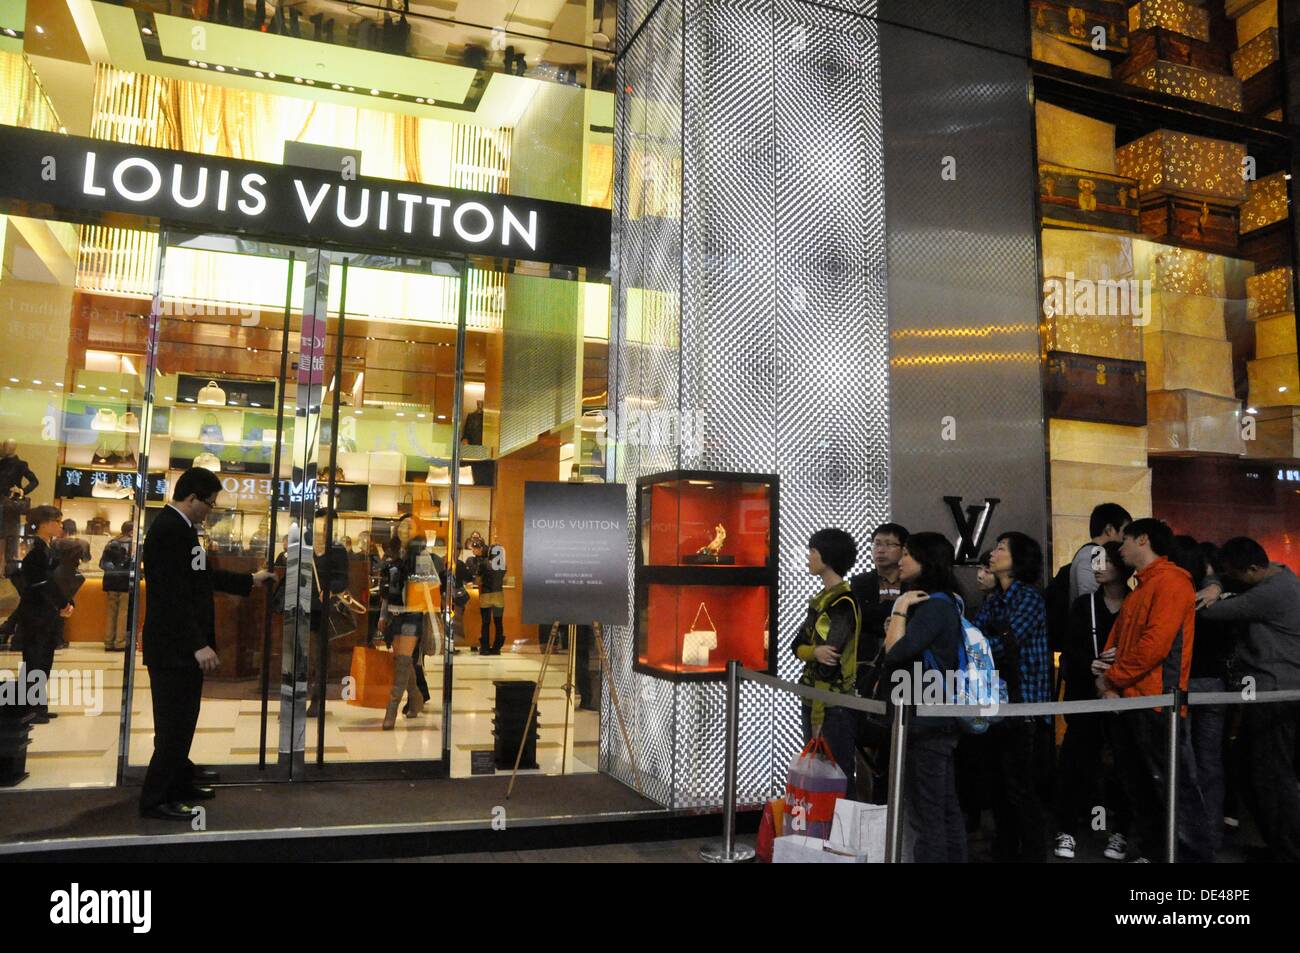 Louis Vuitton to close a major HK store as protests hit sales - CGTN